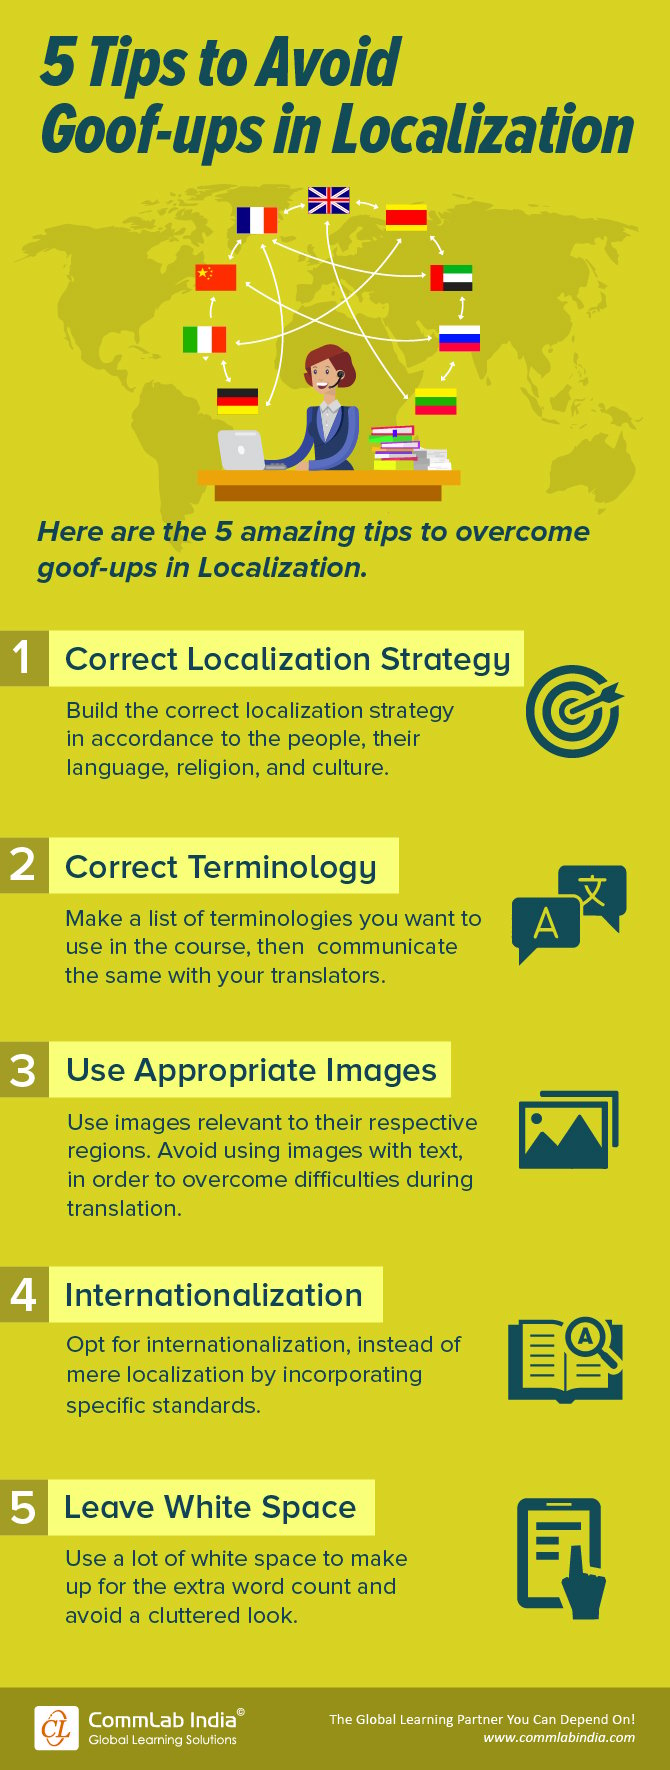 5 Tips to Avoid Goof-ups in Localization [Infographic]